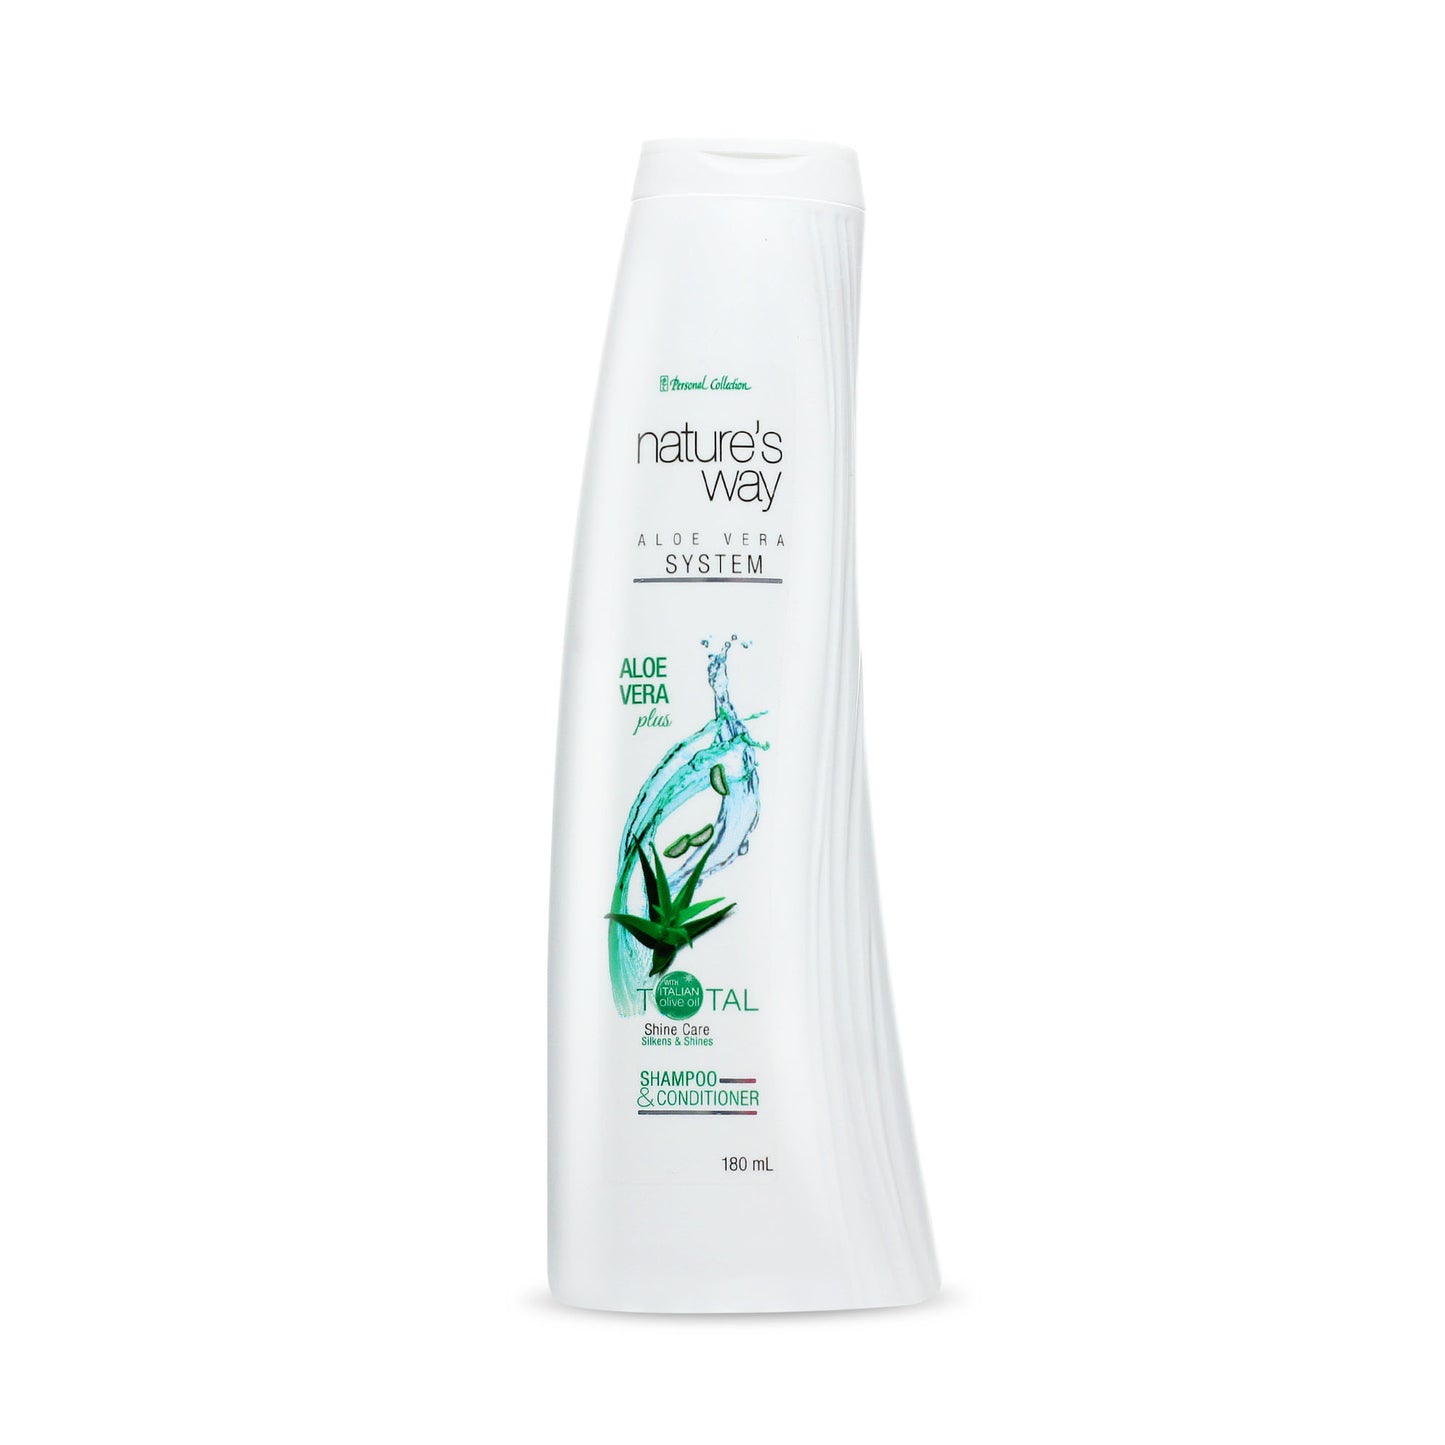 Nature's Way Total Shine Care Shampoo and Conditioner 180 mL